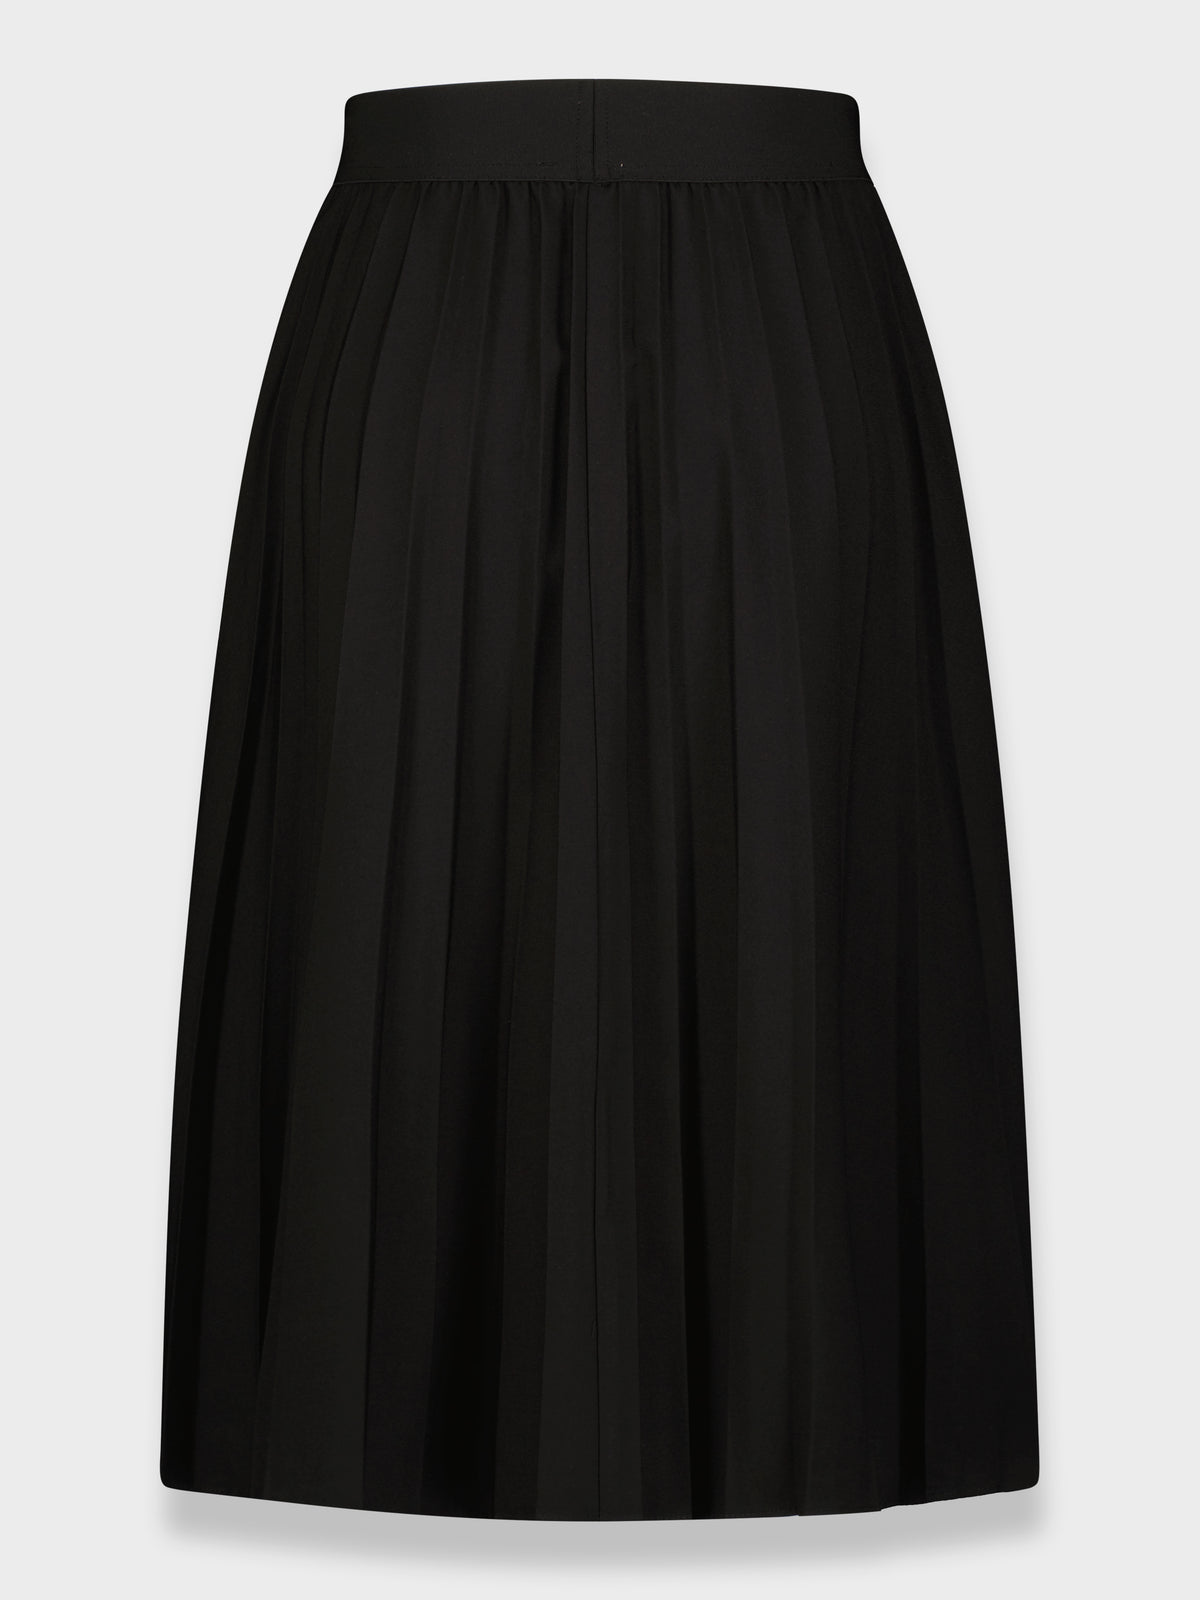 FLAT FRONT PLEATED SKIRT 27"-BLACK